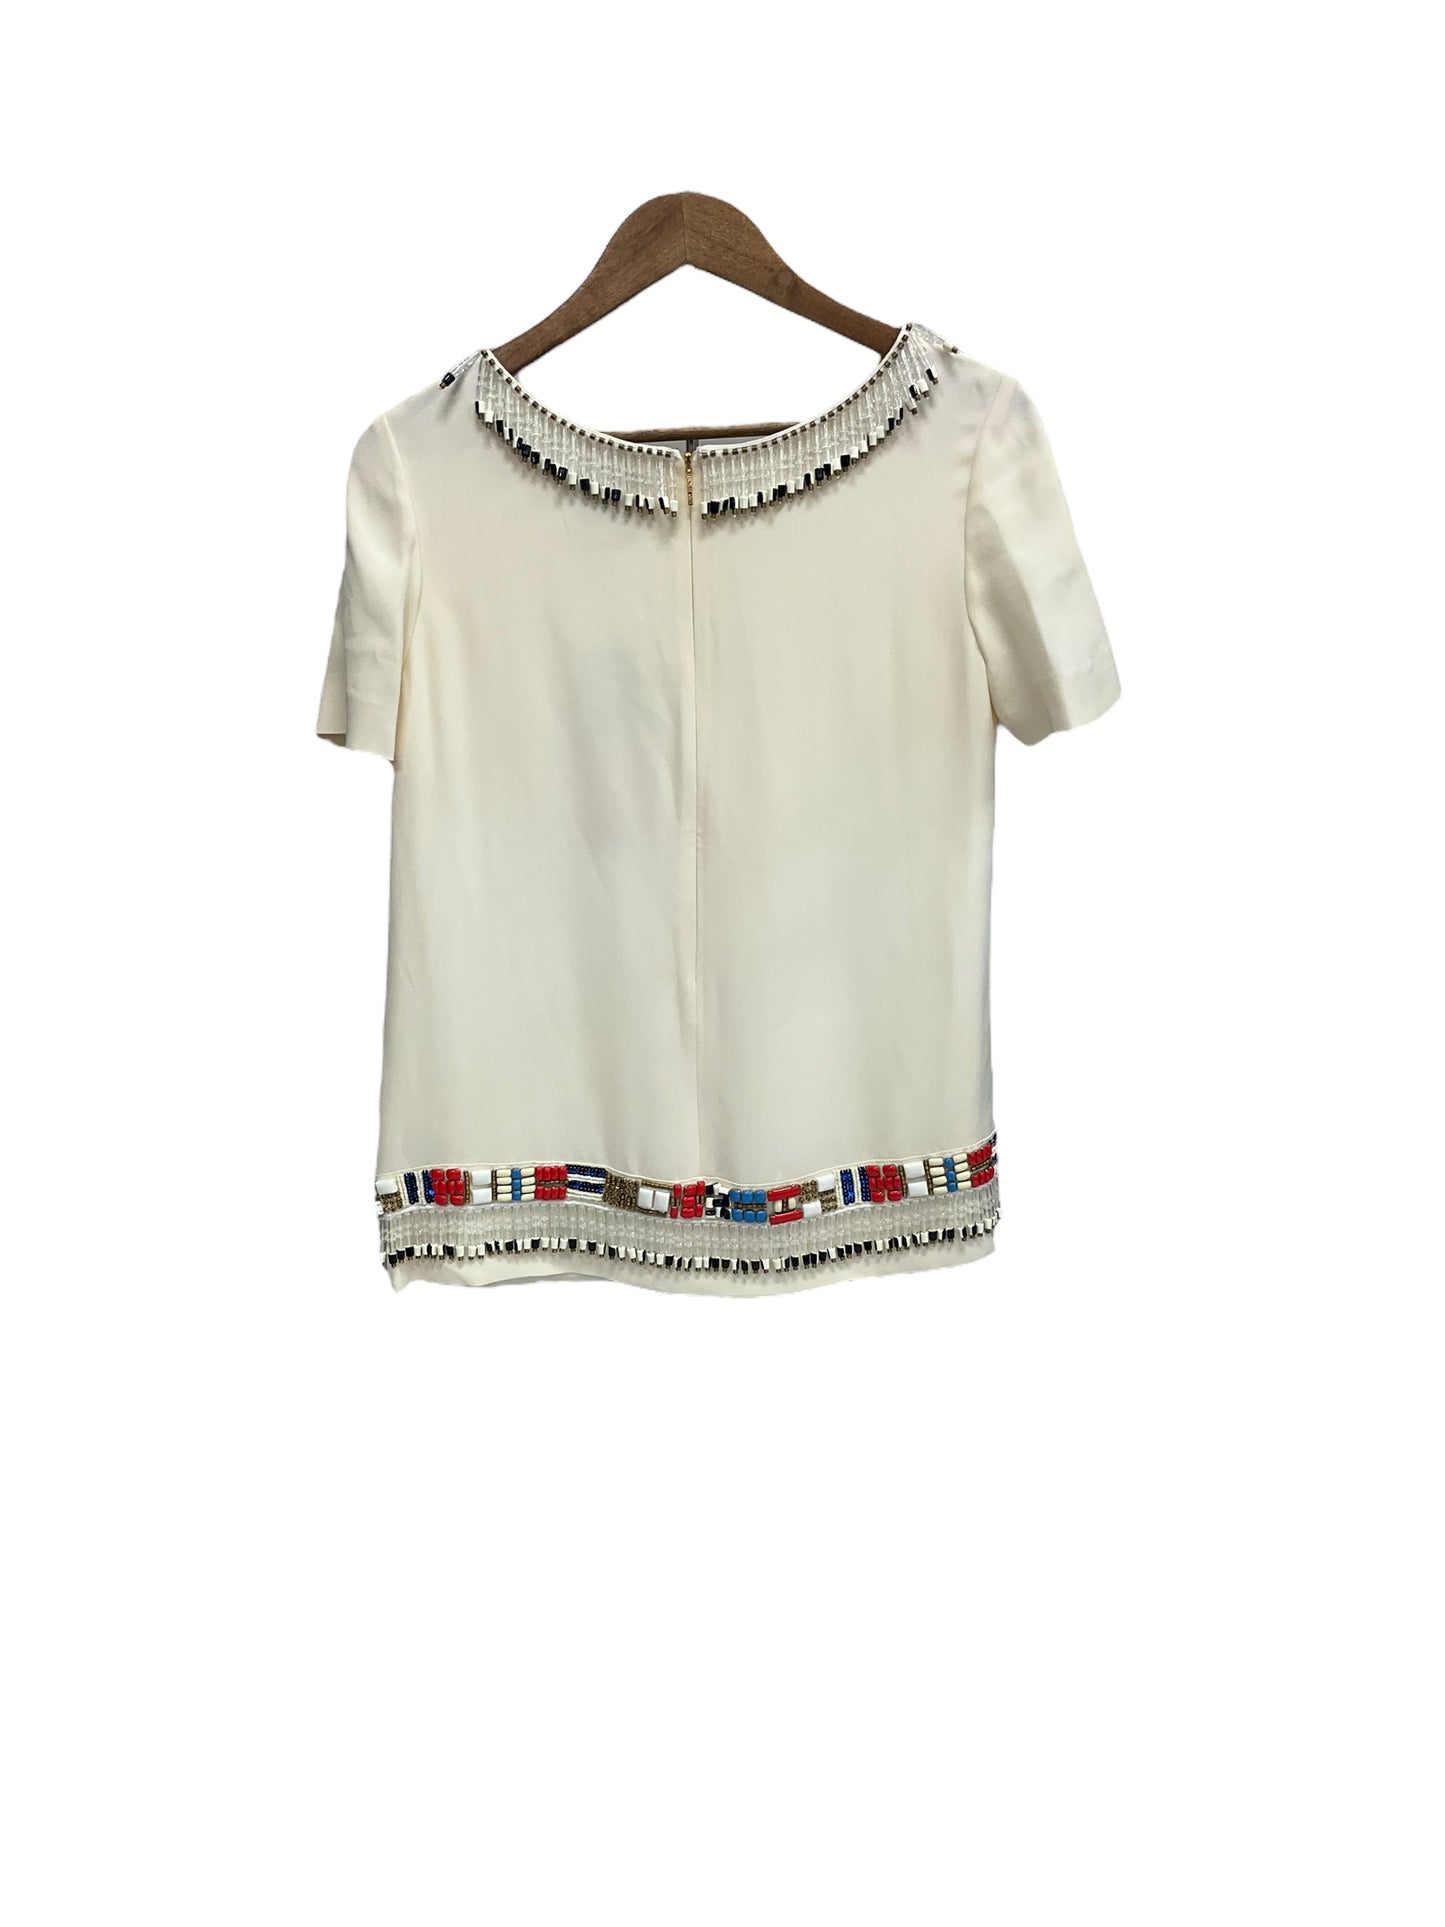 Top Short Sleeve Designer By Tory Burch  Size: 6